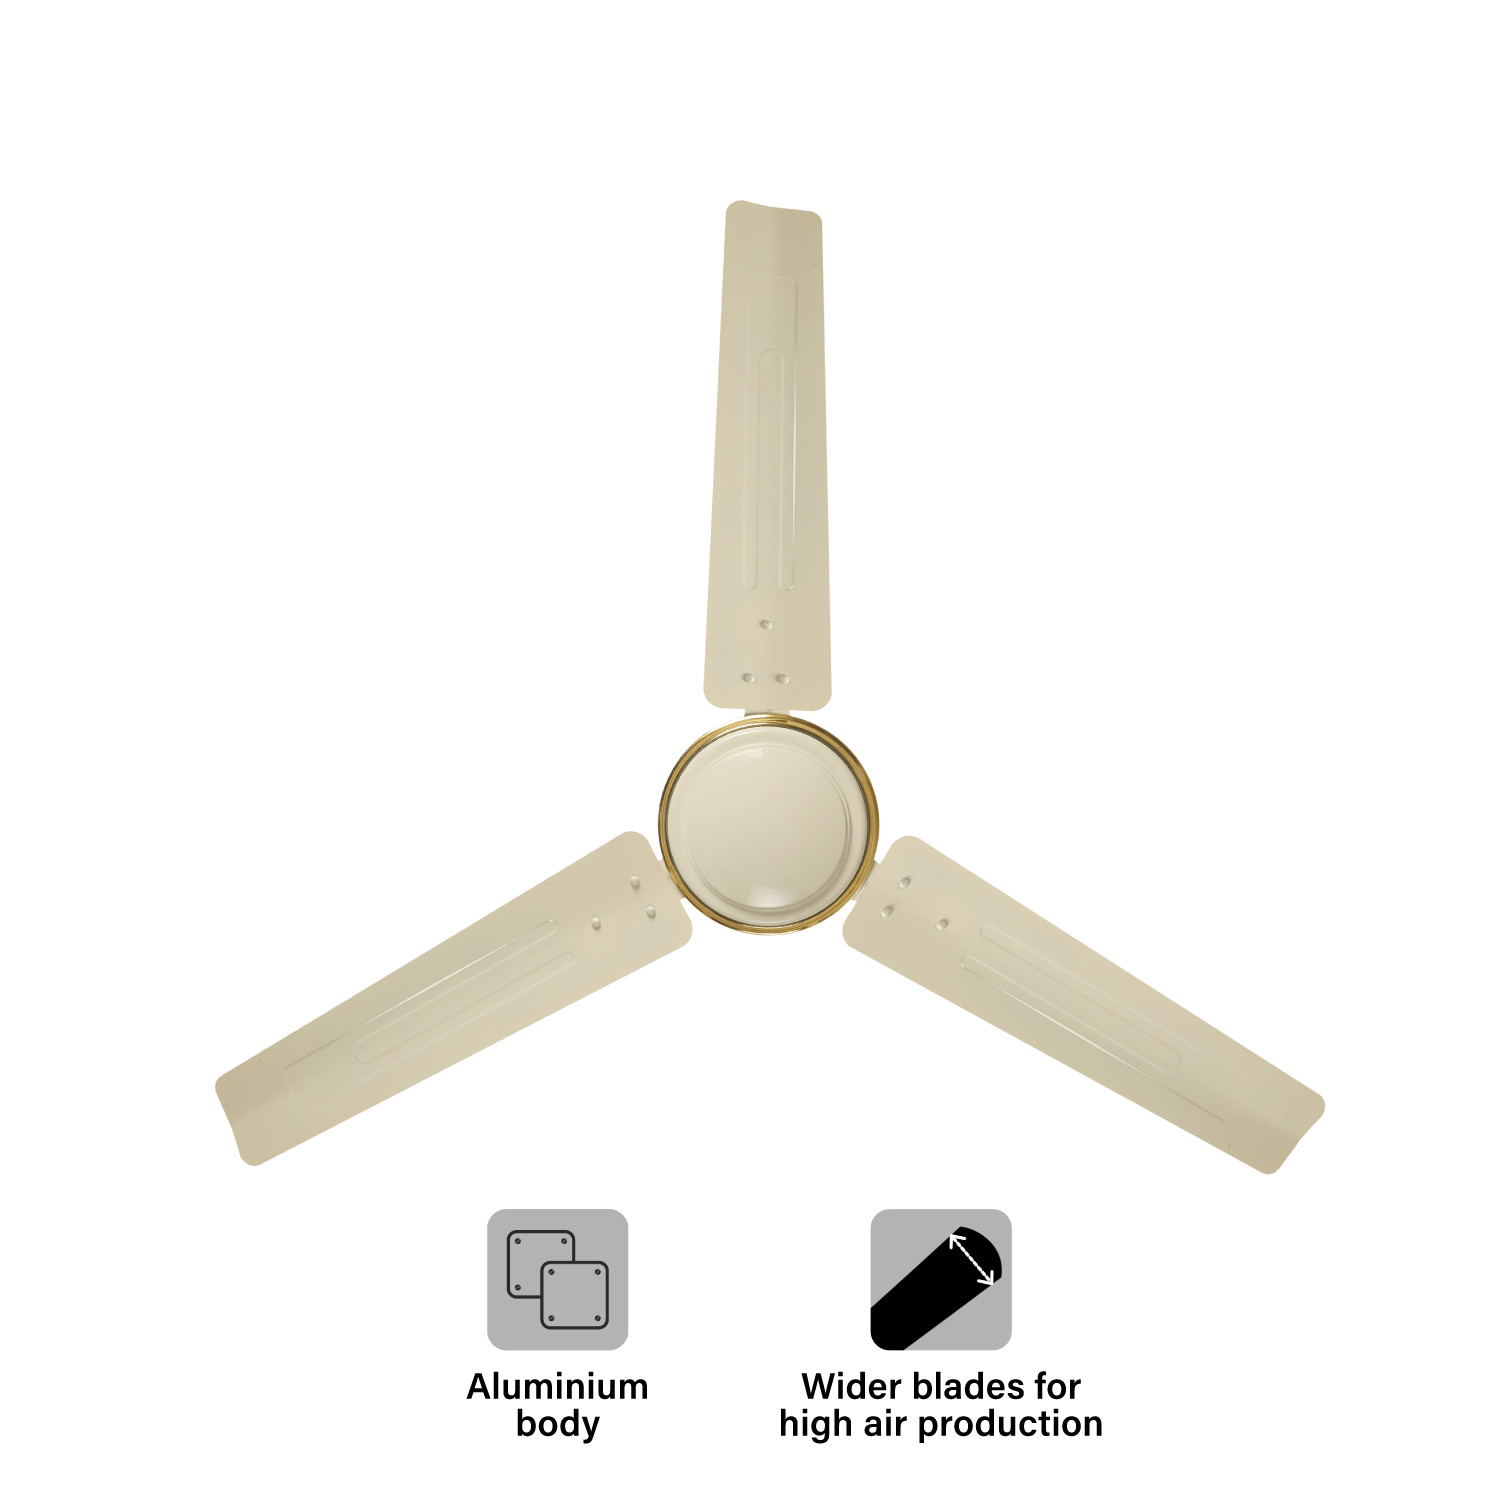 VG Star Breeze 1200 mm 3 Blade Ceiling Fan  (Ivory, Pack of 1) Thumb